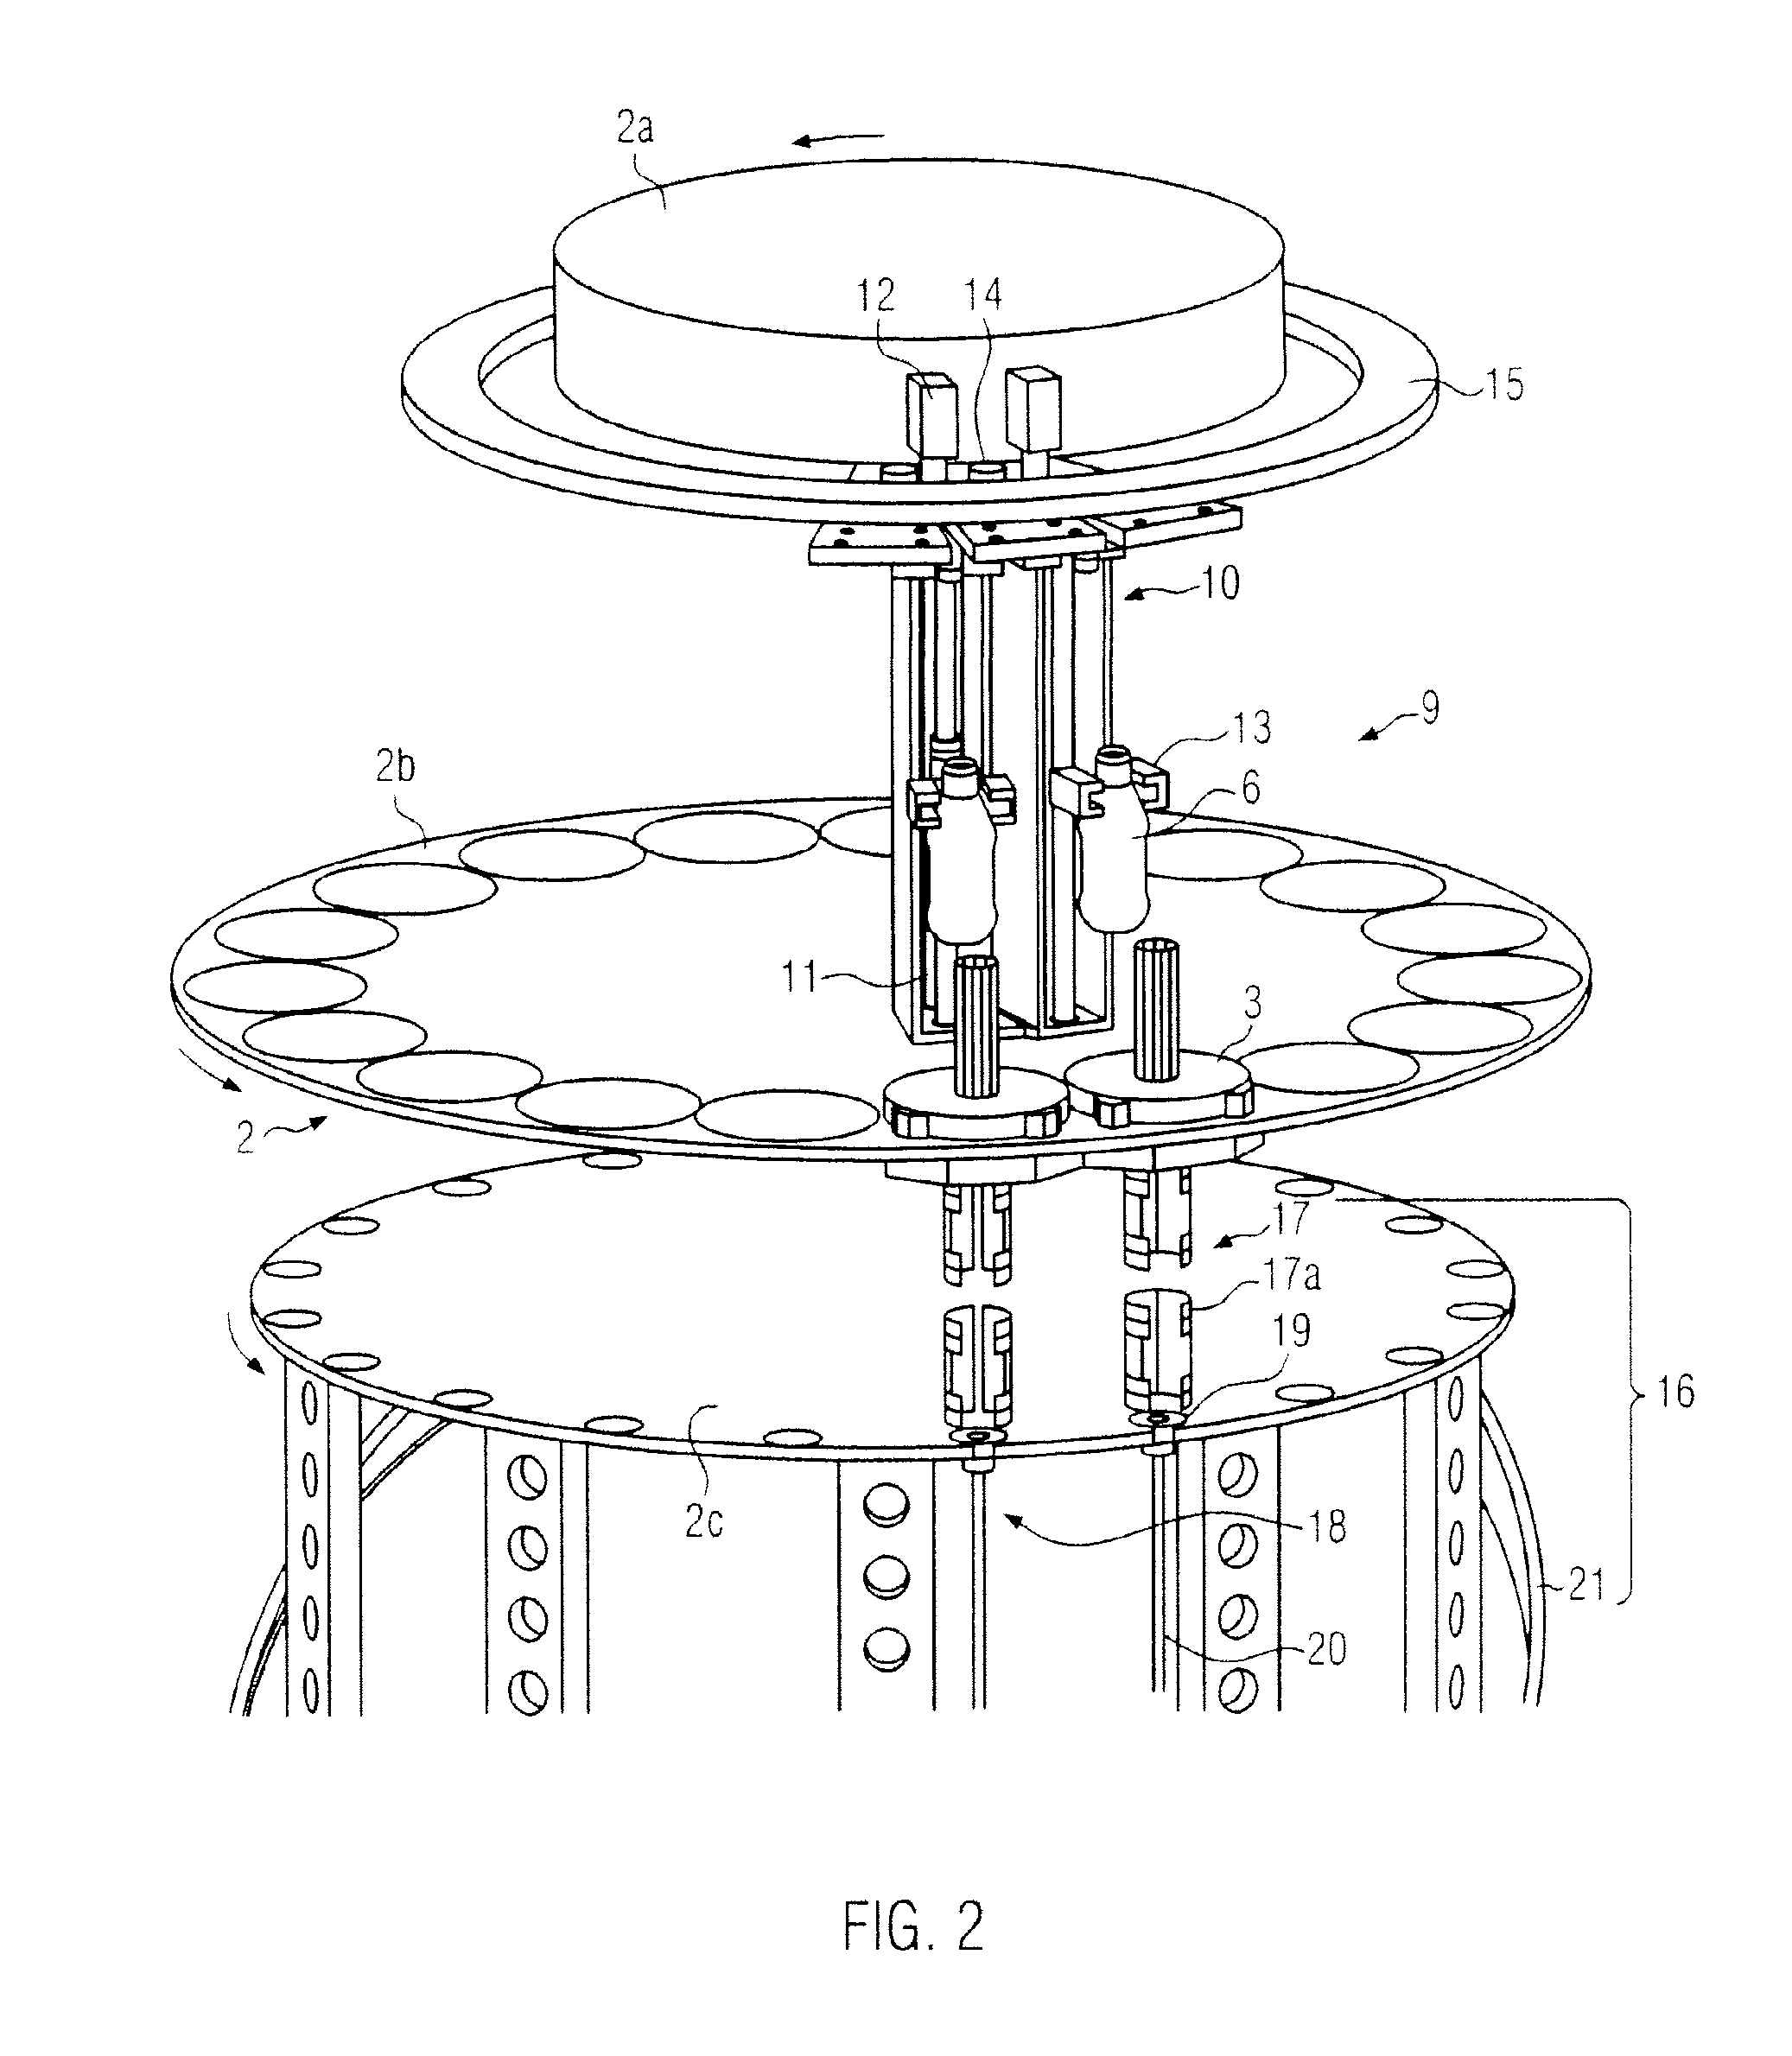 Device and method for applying elastic film sleeves to containers